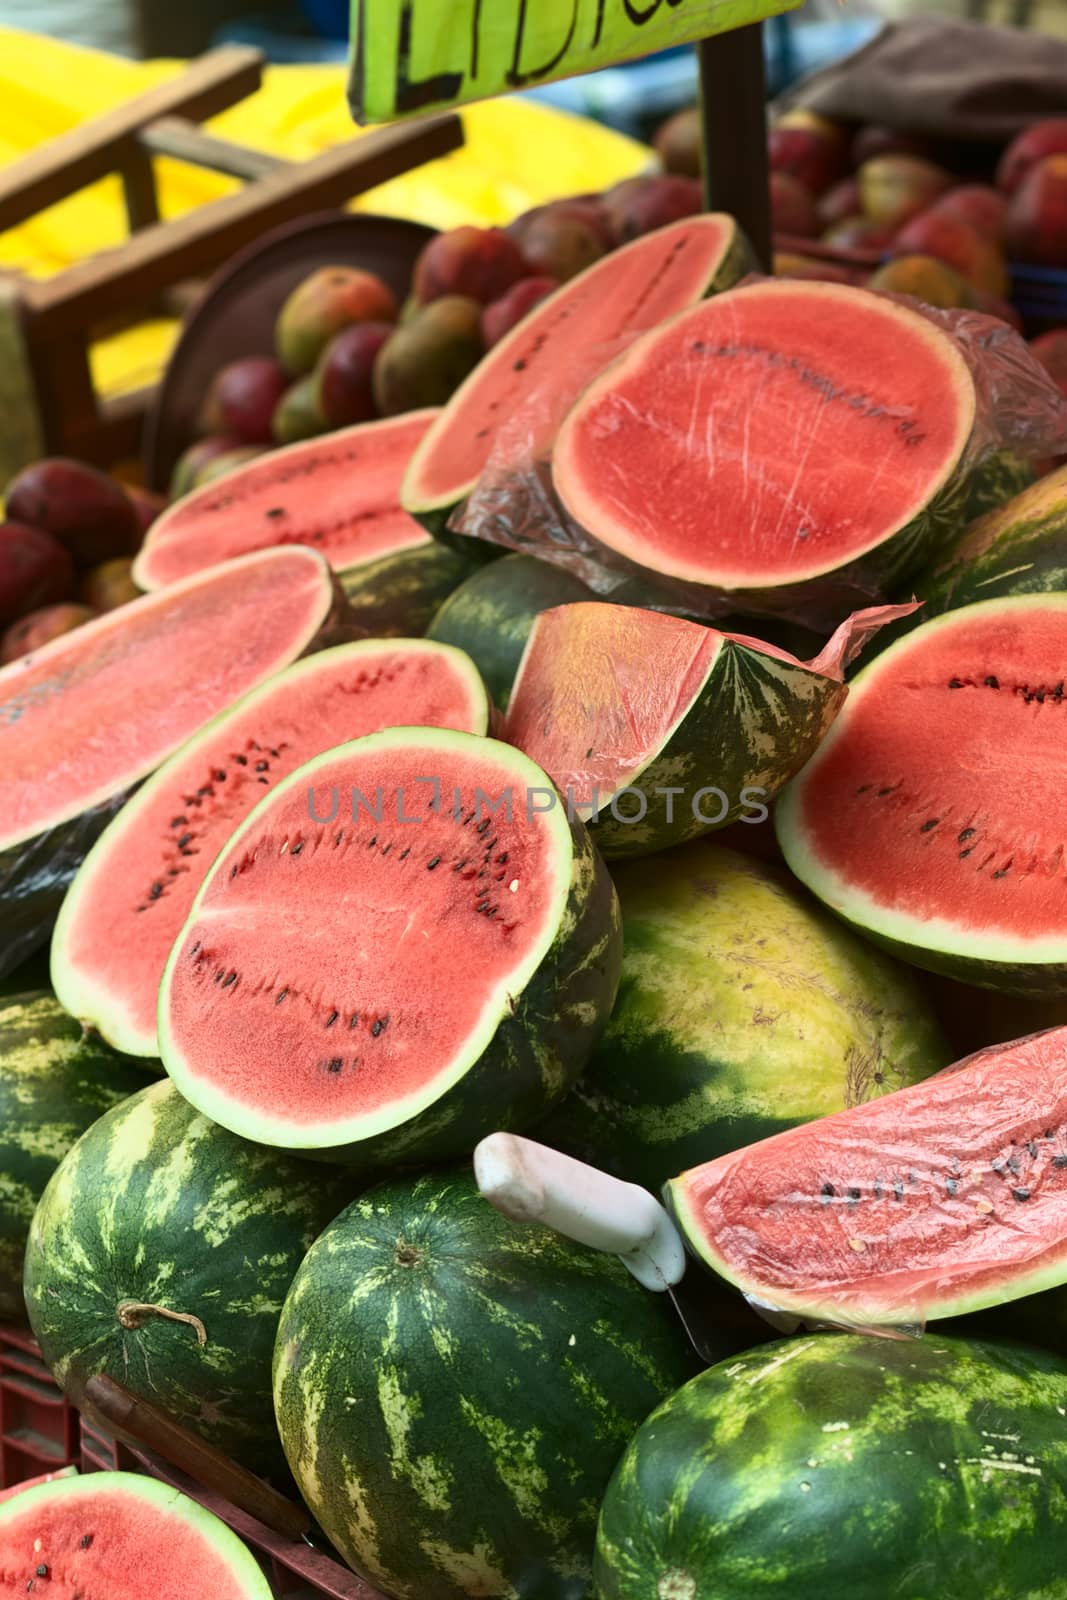 LA PAZ, BOLIVIA - NOVEMBER 10, 2014: Watermelon stand along Max Paredes street in the city center, where many fruits and vegetables are sold on the roadside on November 10, 2014 in La Paz, Bolivia (Selective Focus, Focus one third into the image)